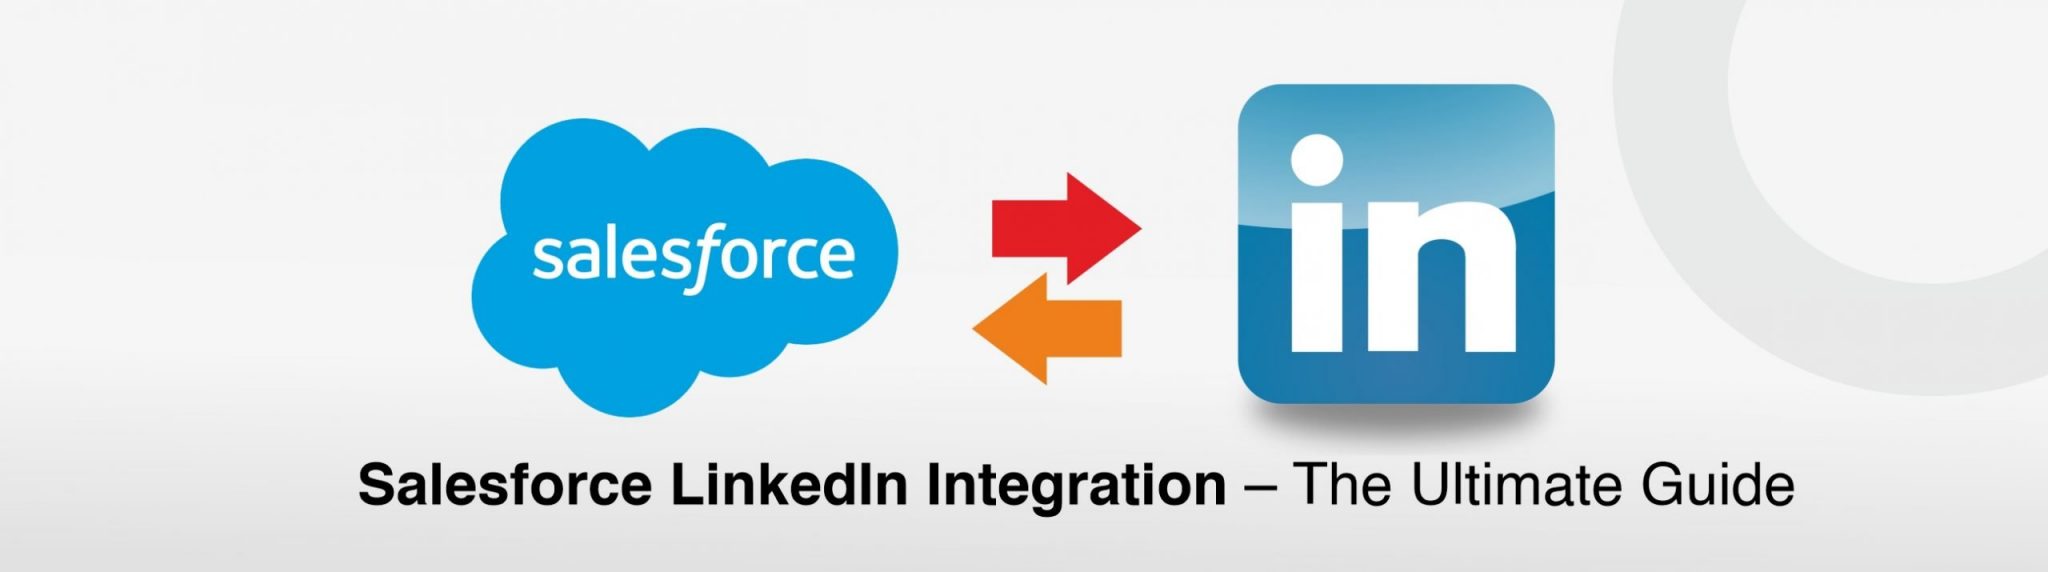 Salesforce-LinkedIn-Integration-–-The-Ultimate-Guide-scaled-1-2048x572